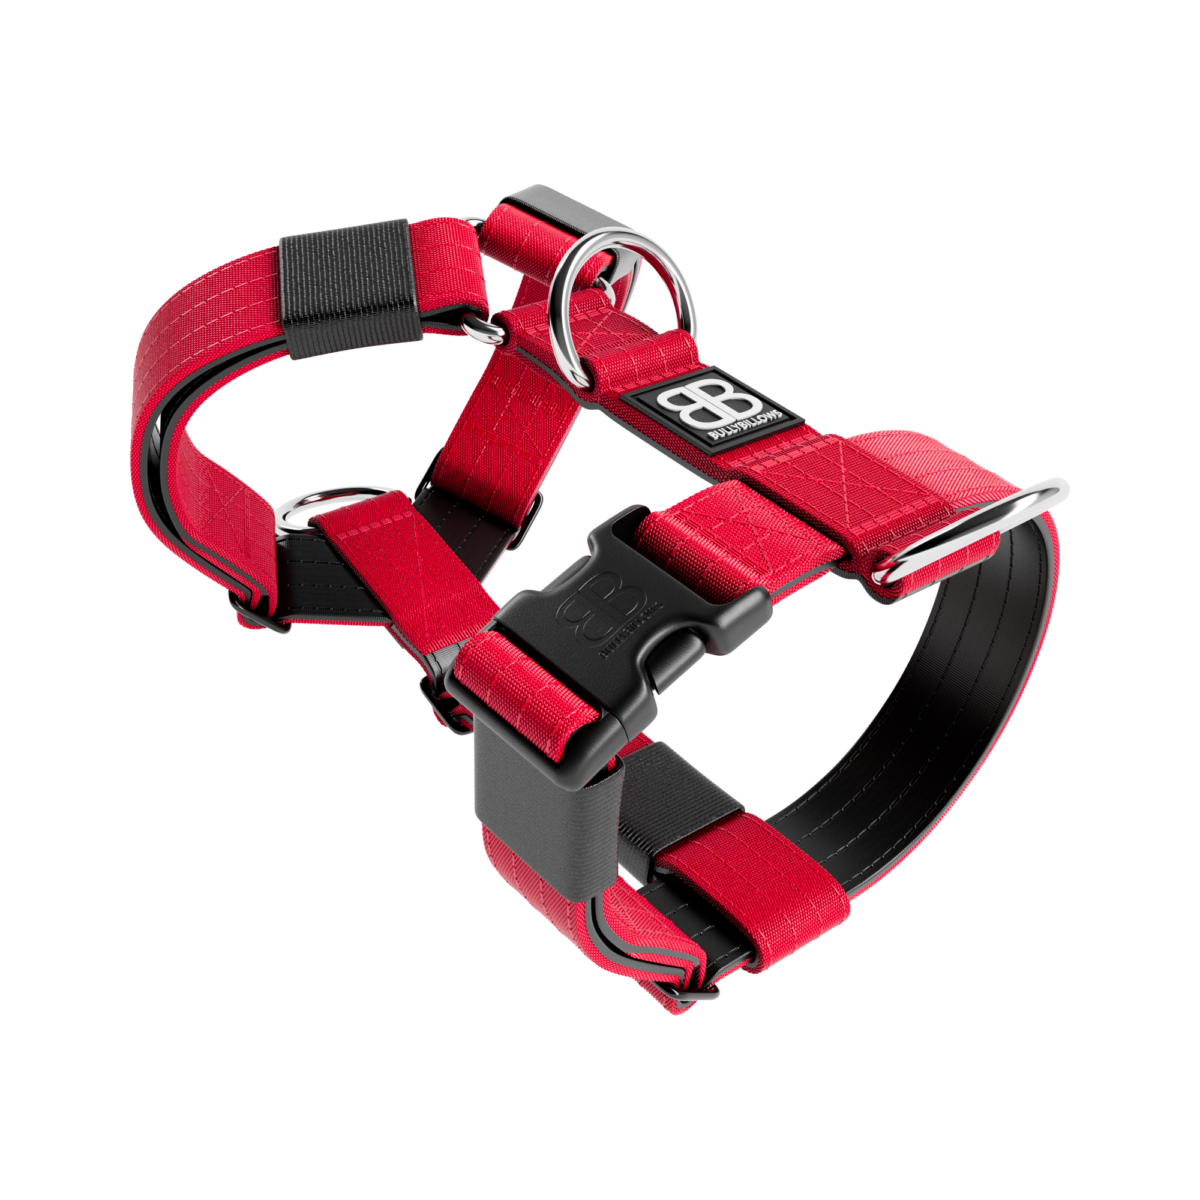 BULLYBILLOWS TRI-Harness - Anti-Pull, Adjustable & Durable - Dog Trainers Choice - Red v2.0